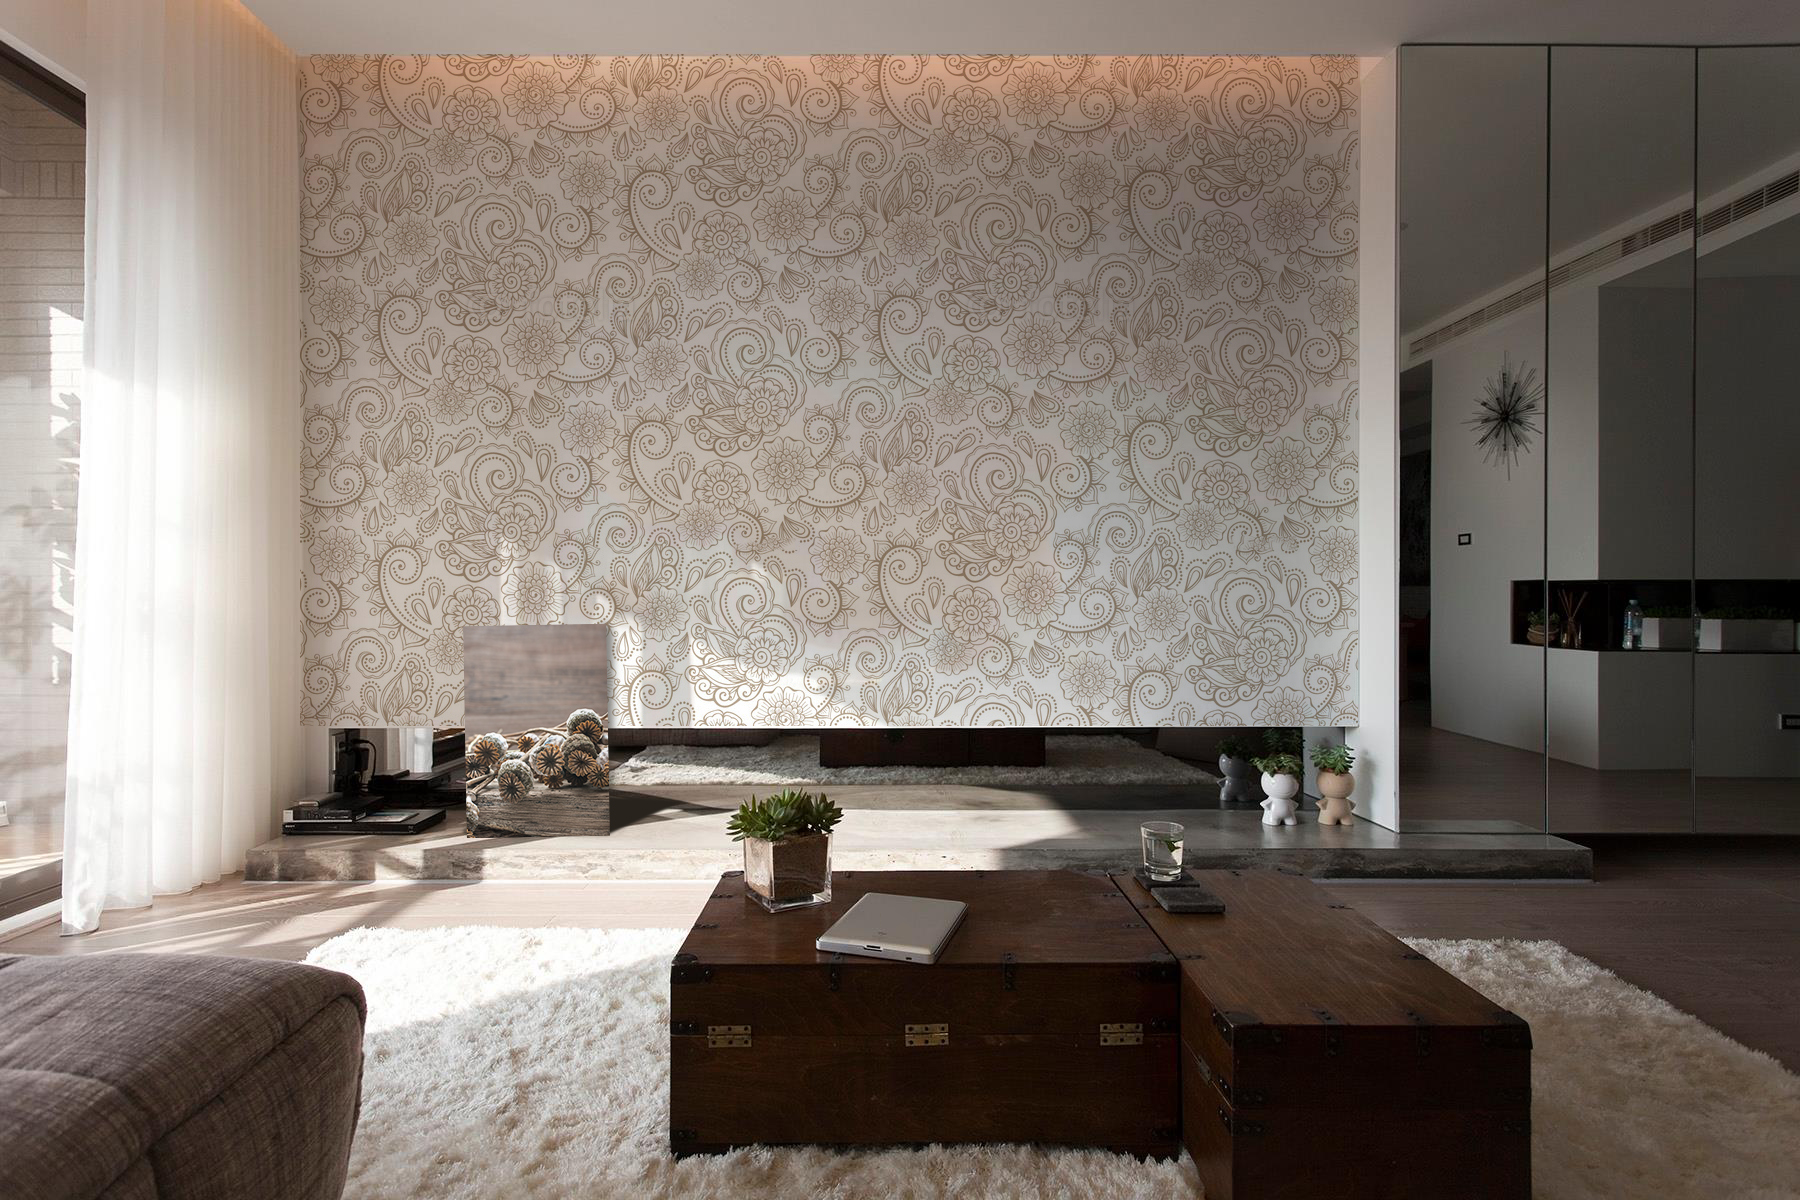 Floral Pattern • Living room - Contemporary - Textures and patterns - Wall Murals - Prints